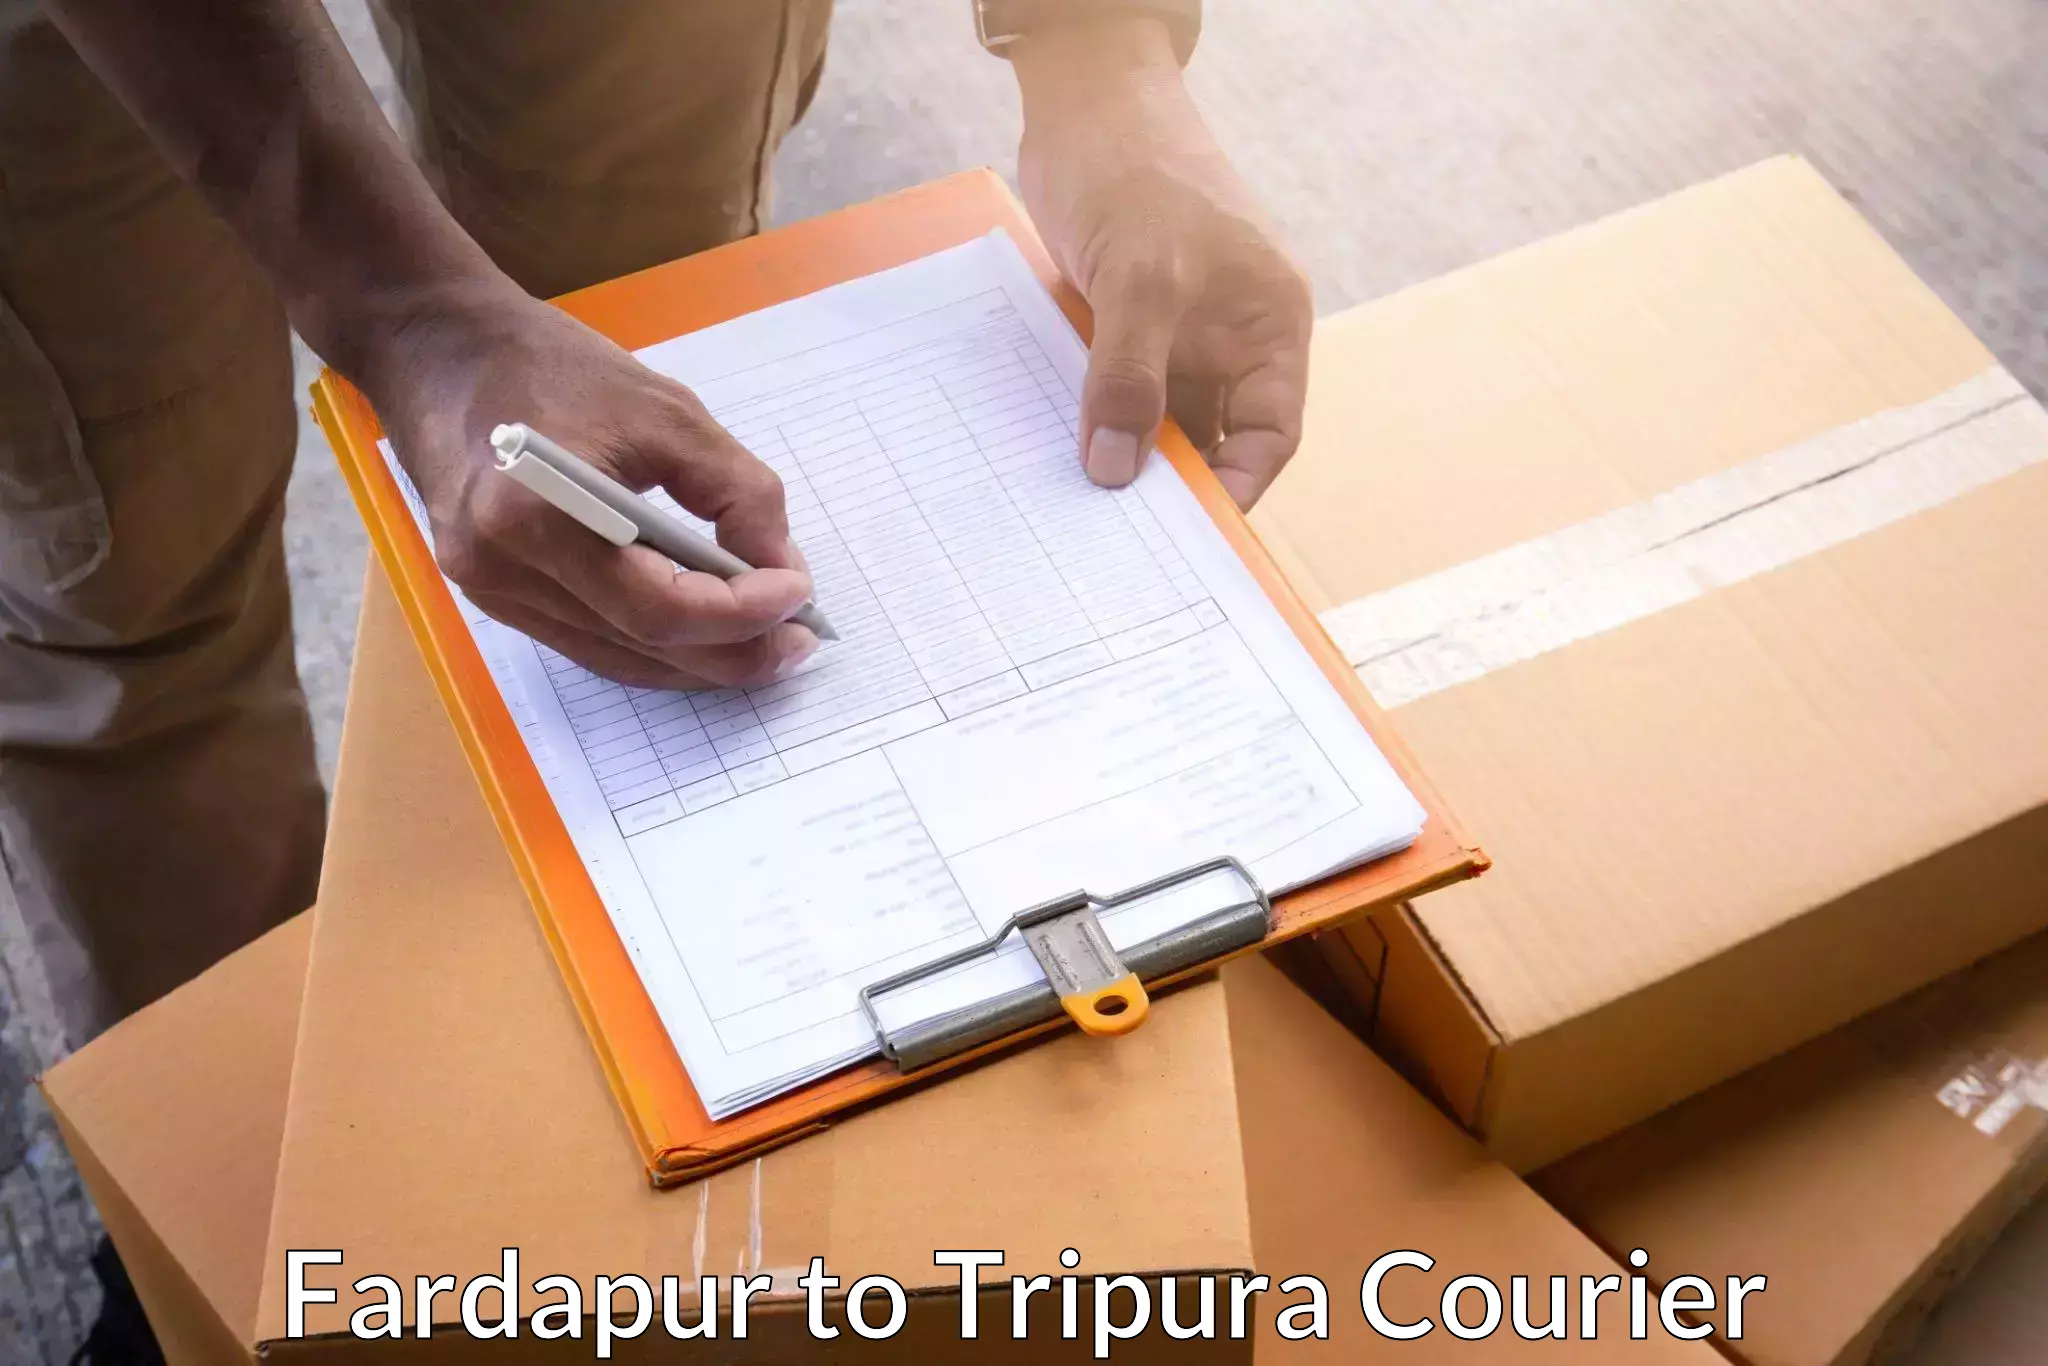 Nationwide courier service Fardapur to Tripura